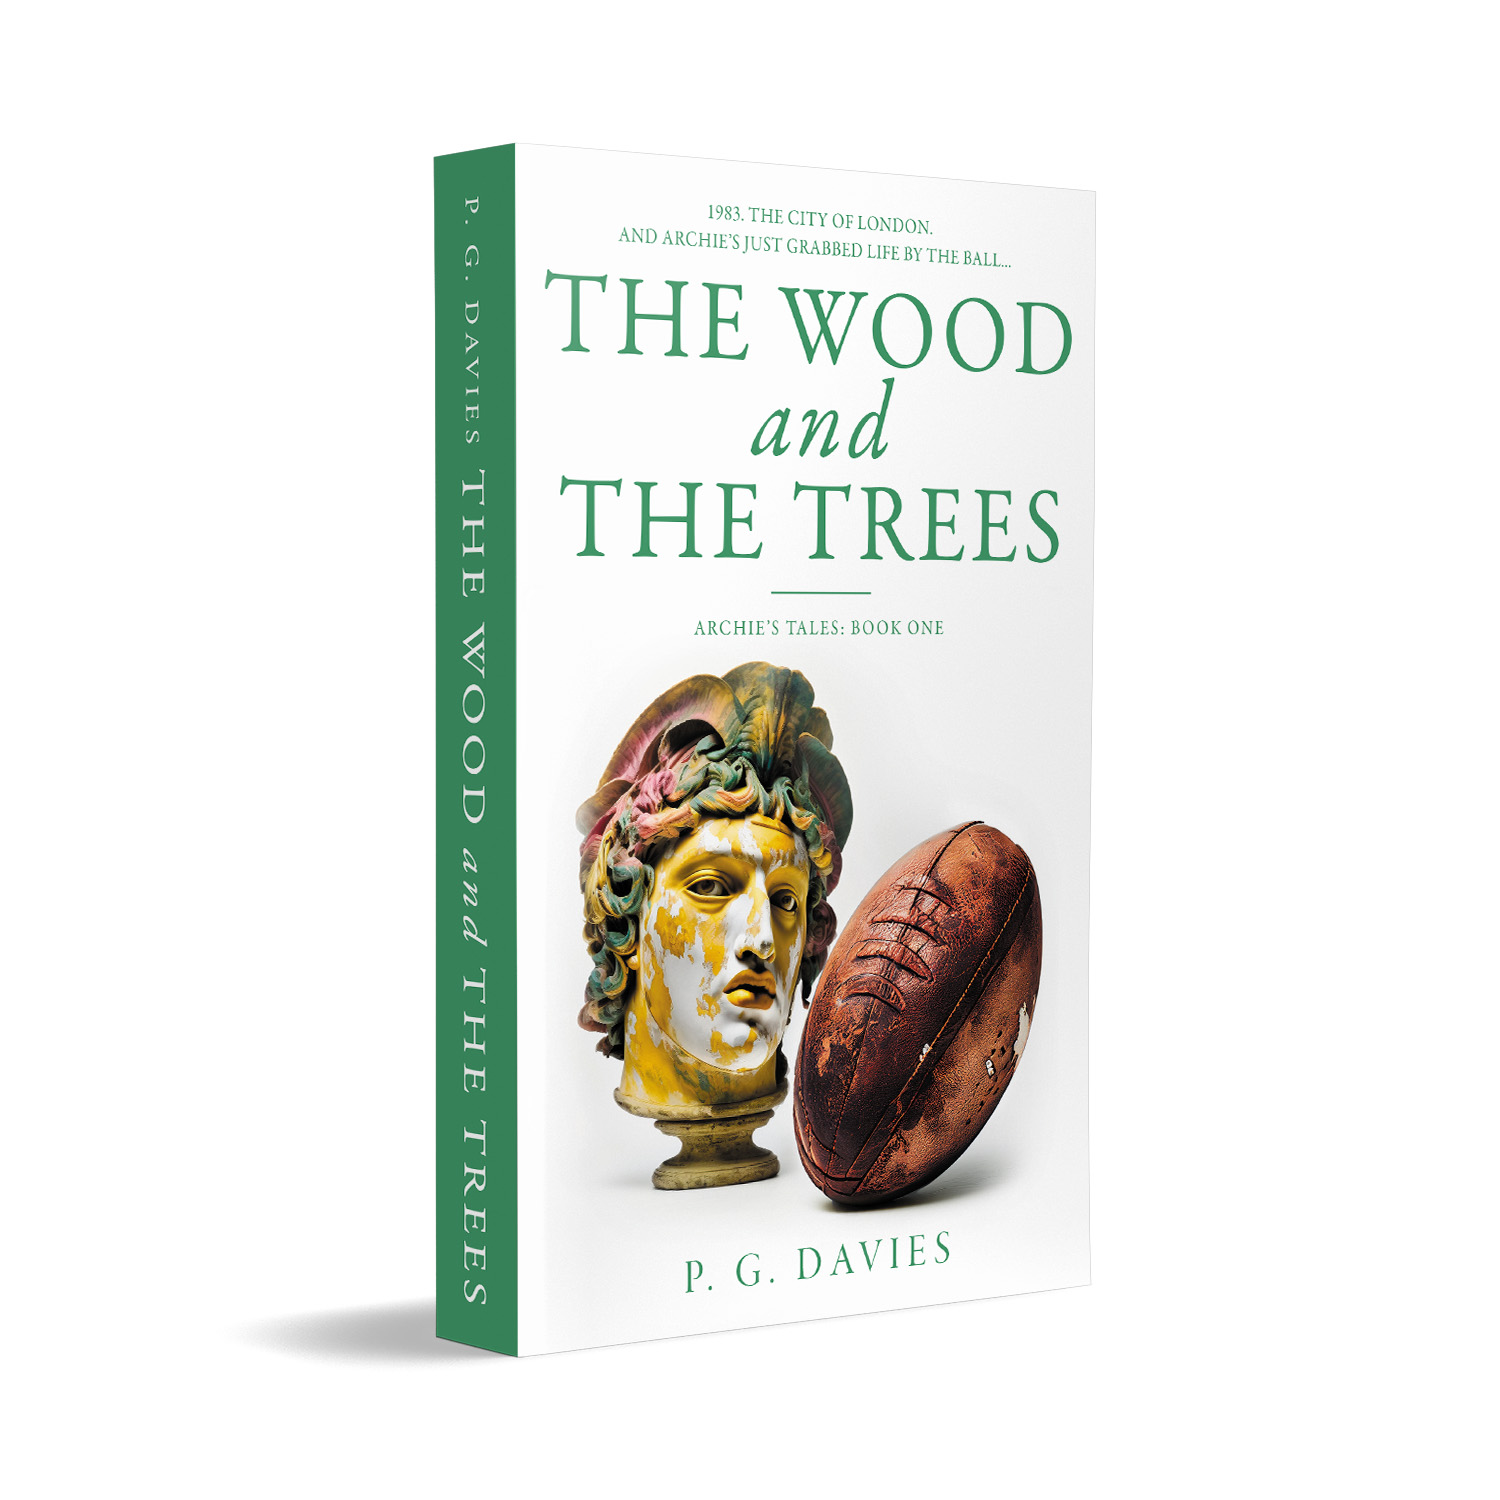 'The Wood and The Trees' is a heart-warming satirical novel set in the high-rolling financial boom of 1980s London. The author is P. G. Davies. The cover design and interior formatting are by Mark Thomas of coverness.com. To find out more about my book design services, please visit www.coverness.com.